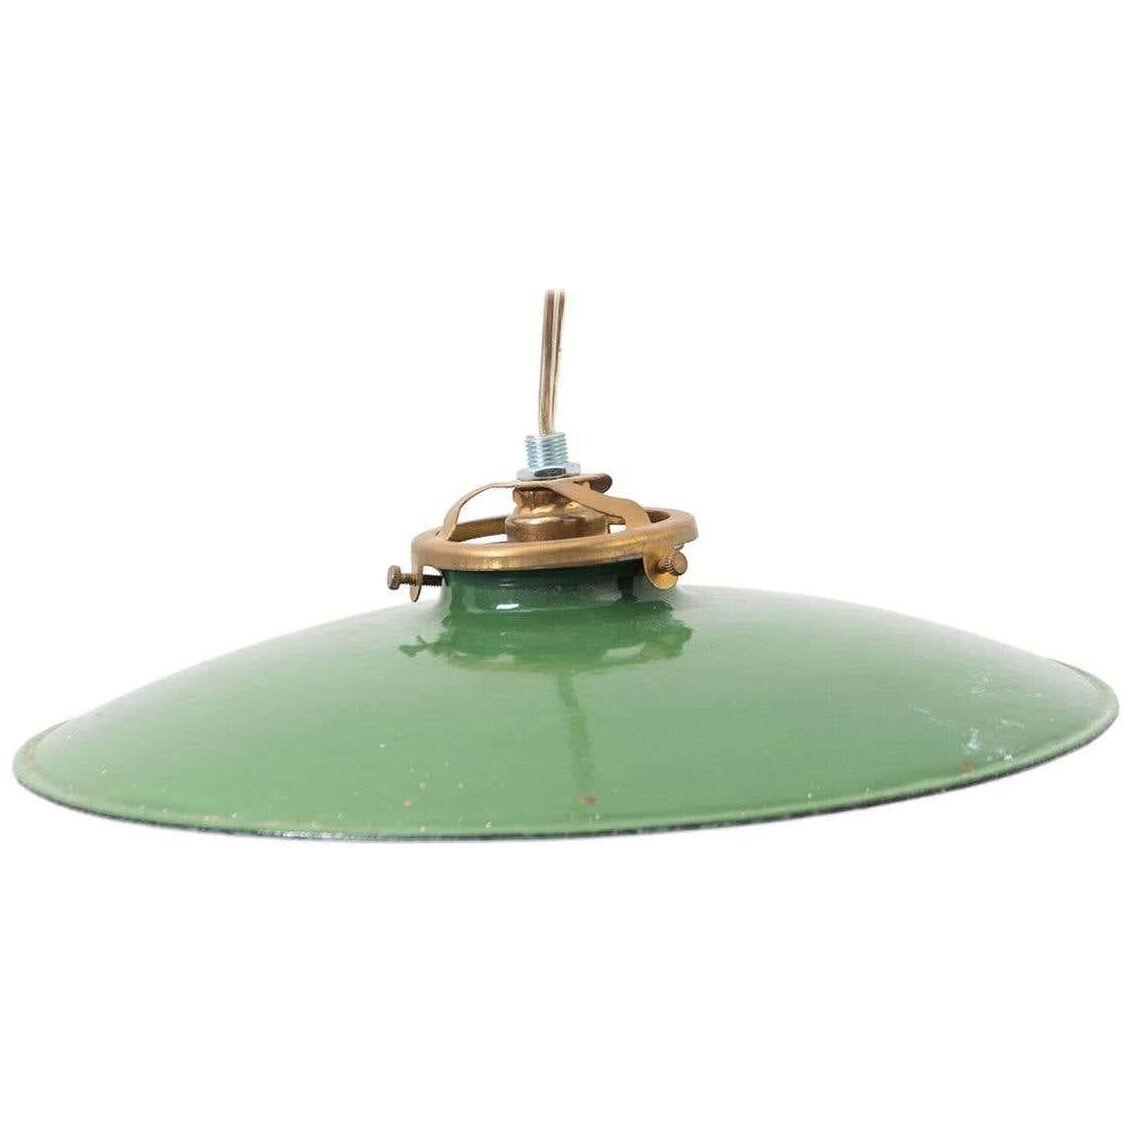 Early 20th Century Antique Green Lacquered Metal Ceiling Lamp